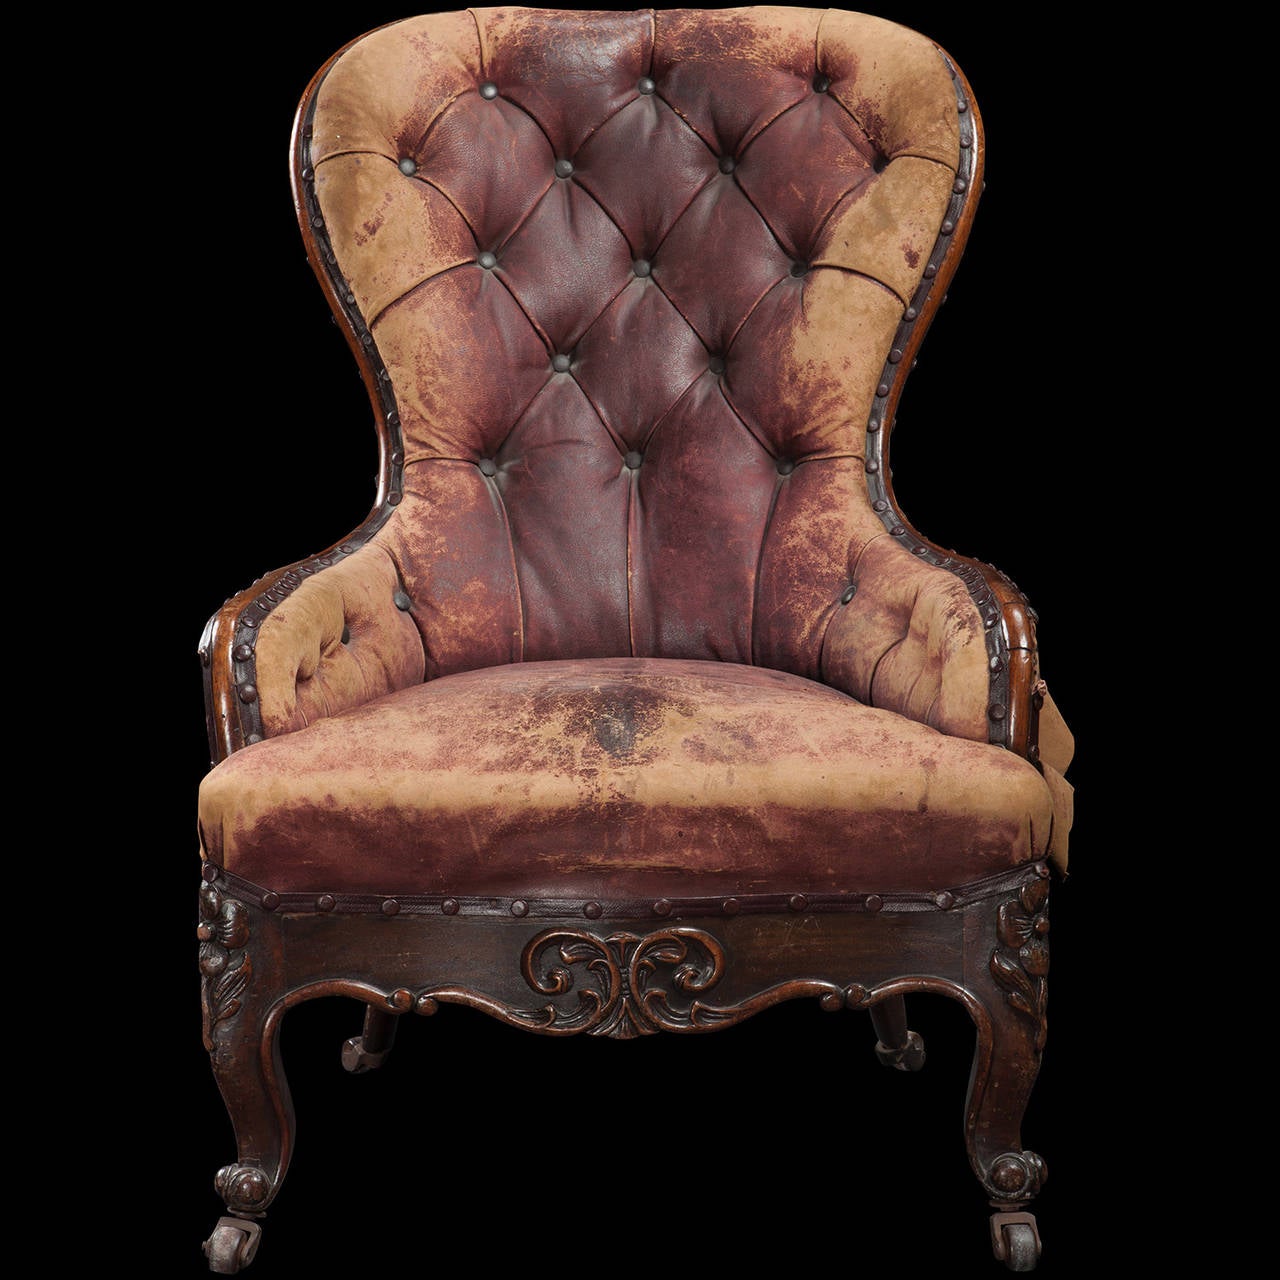 Tufted spoon-back chair with solid walnut from and ornately carved legs on original castors.